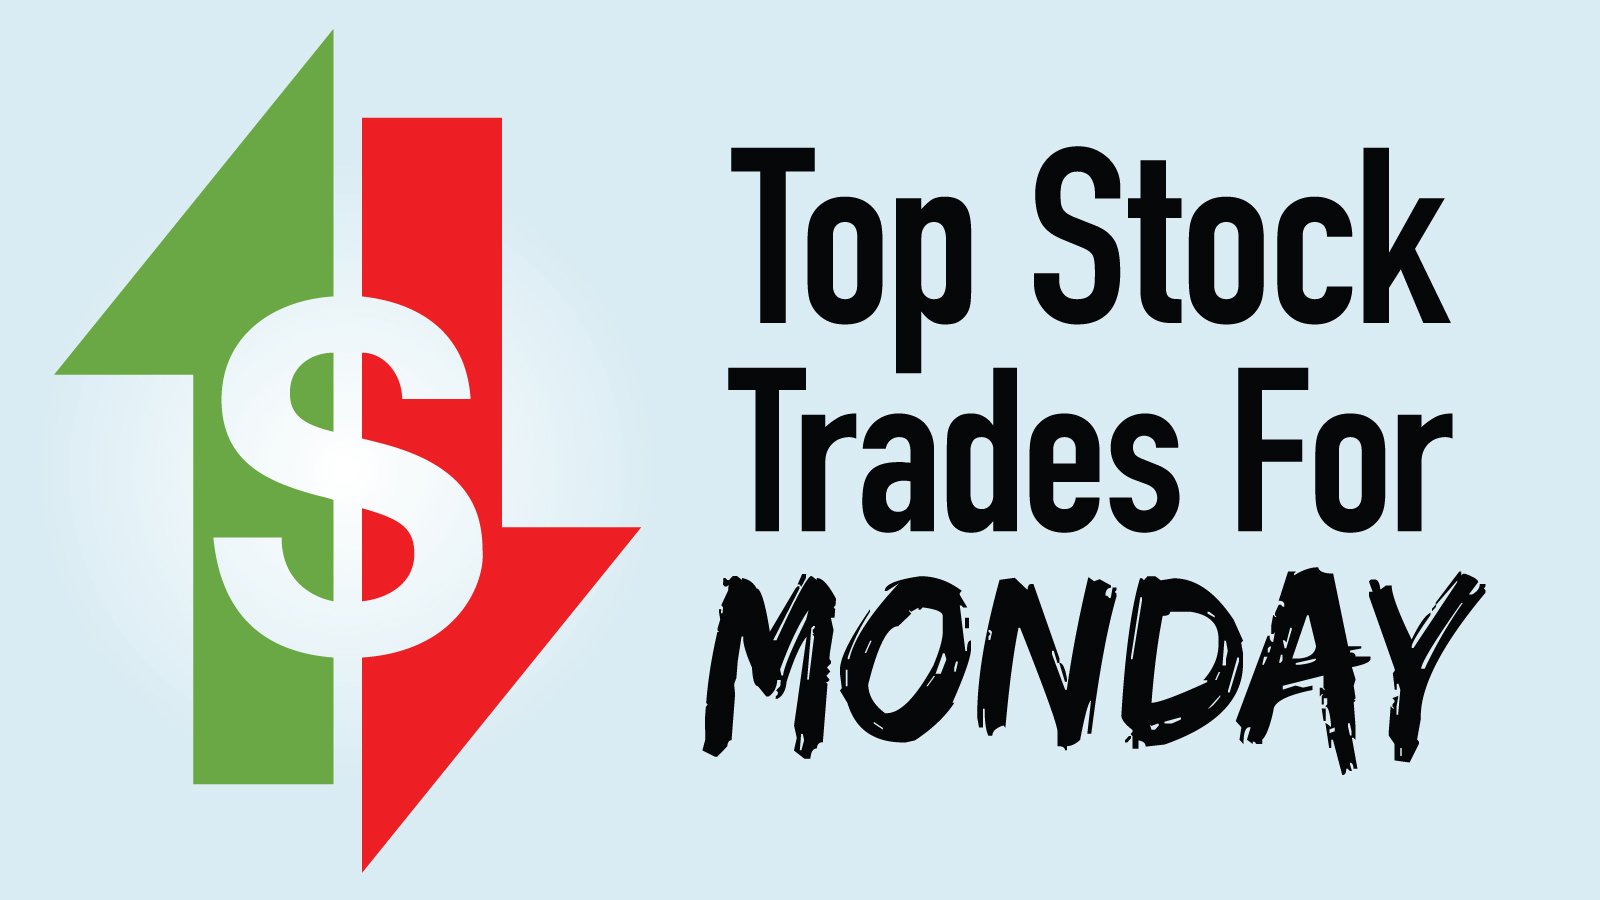 5 Top Stock Trades for Monday: COST, TTD, SWBI, ATCG, GPS - Investorplace.com